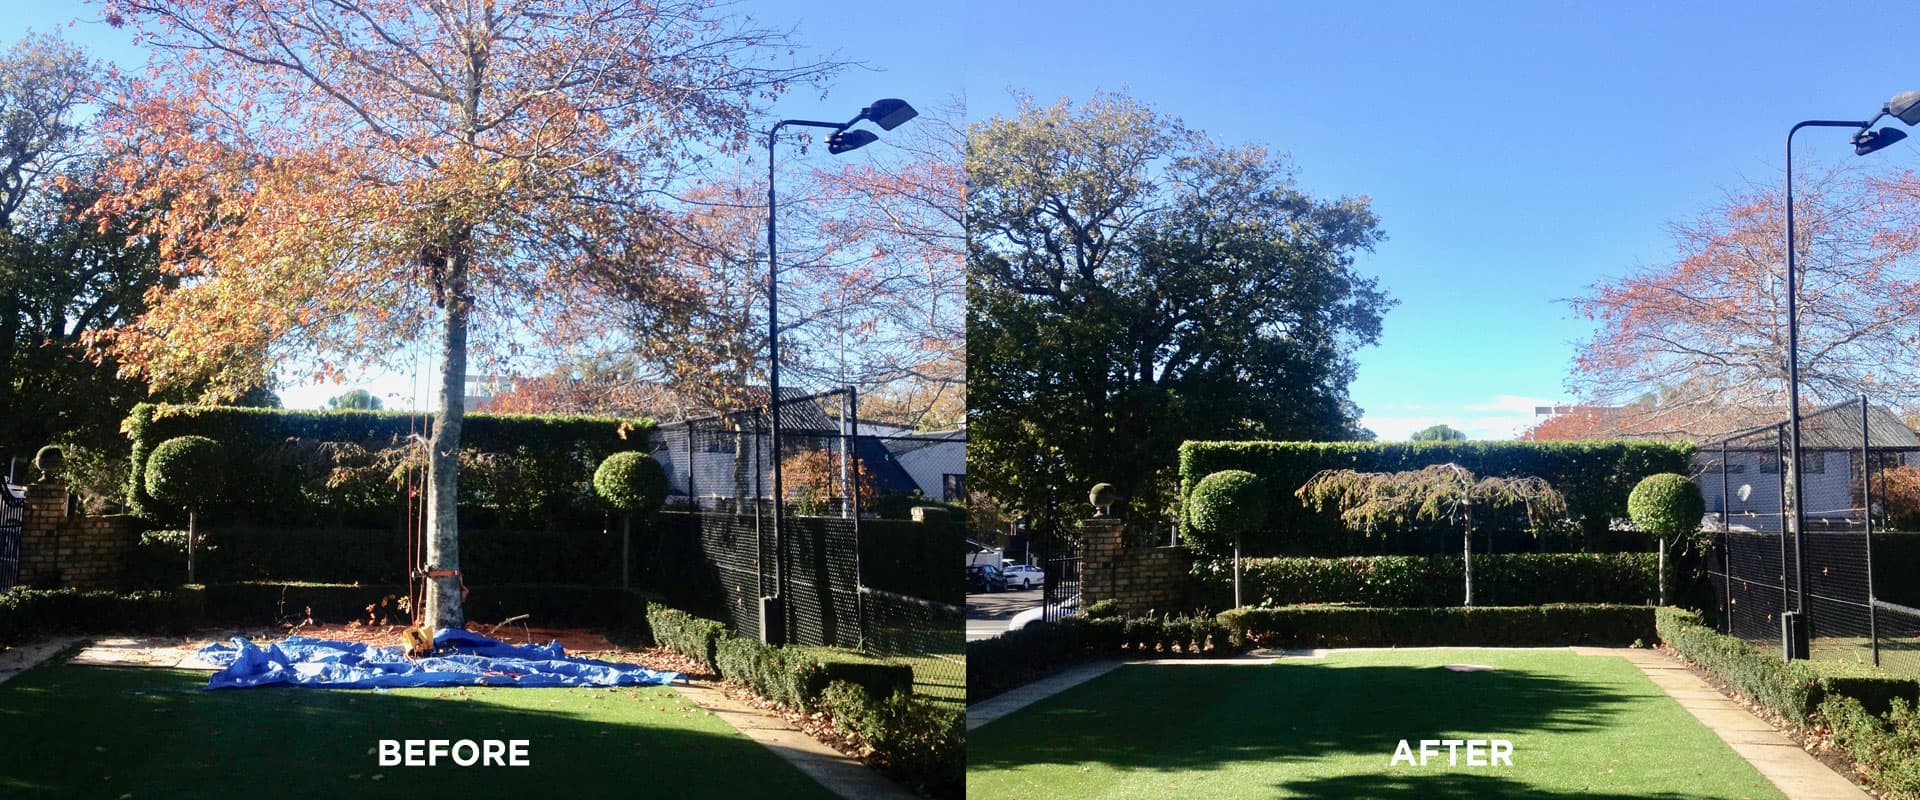 Tree Removal Services Before and After